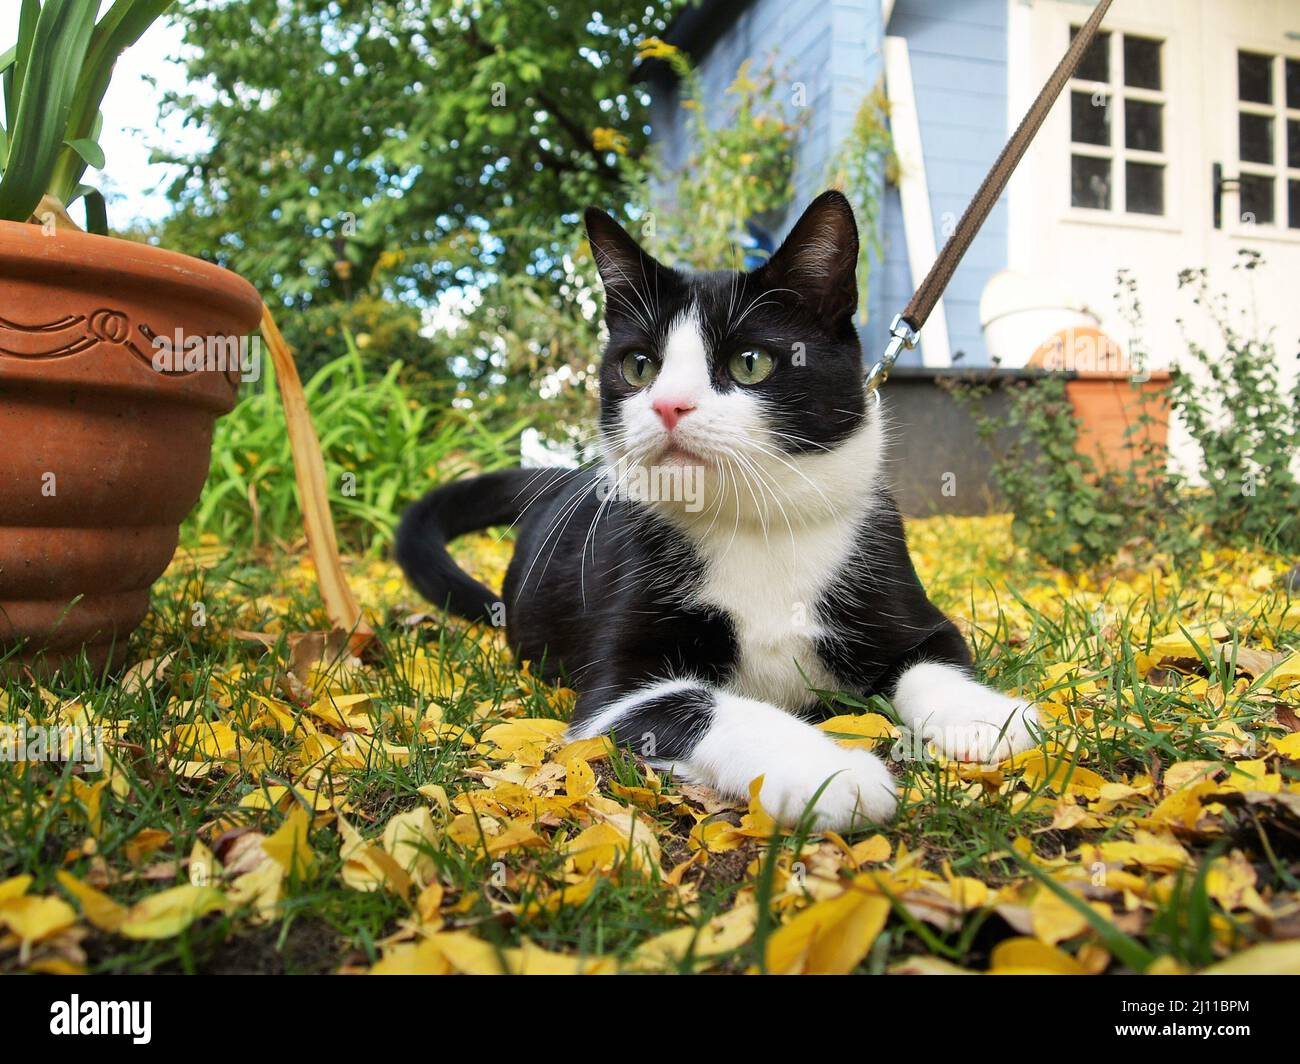 Cat on a Leash in the Garden Stock Photo